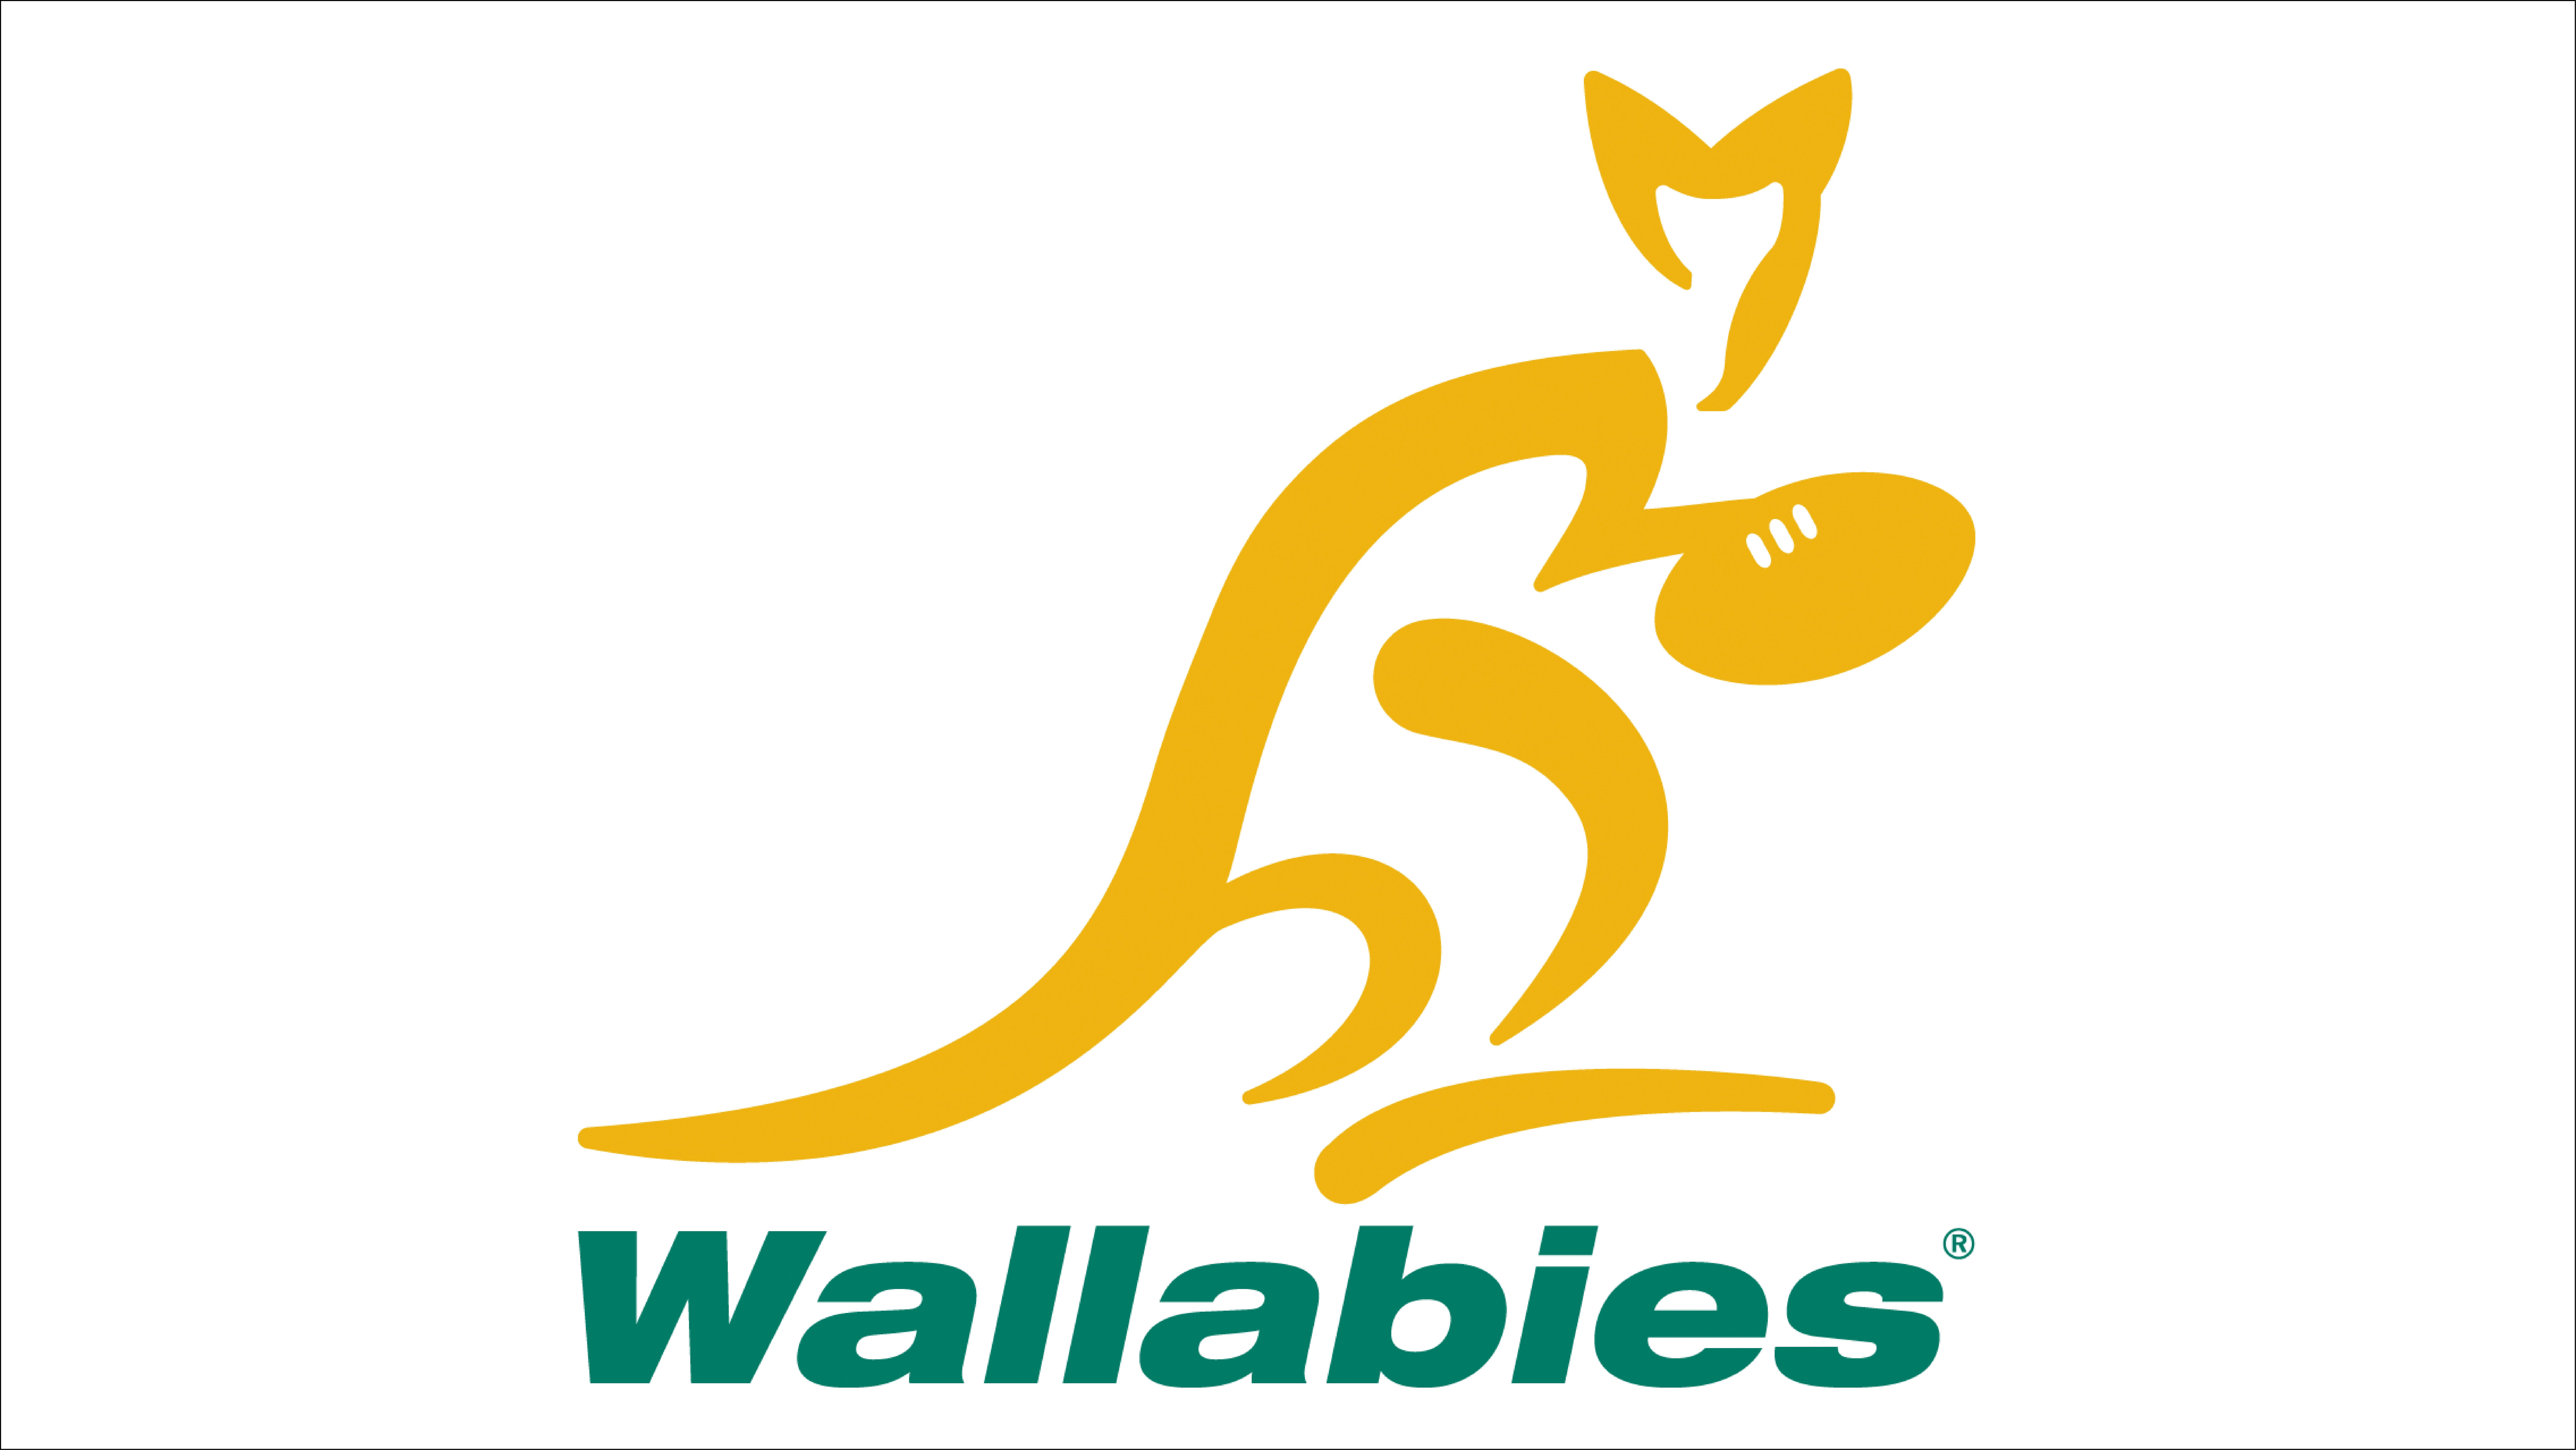 Wallabies v South Africa in Burswood promo photo for Super Rugby Clubs presale offer code